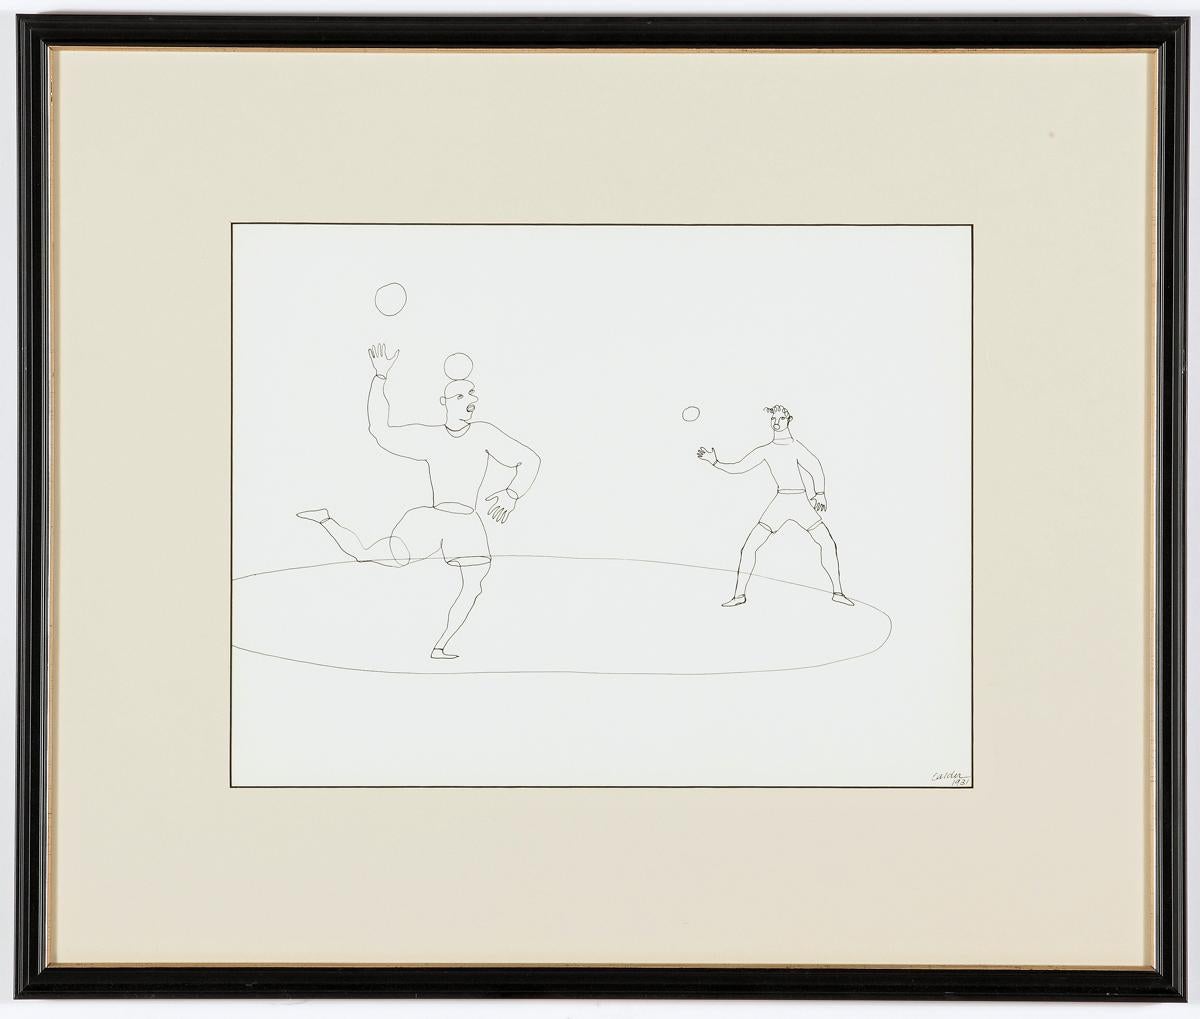 Calder Circus, complete Set of 16 lithographs after the original drawings